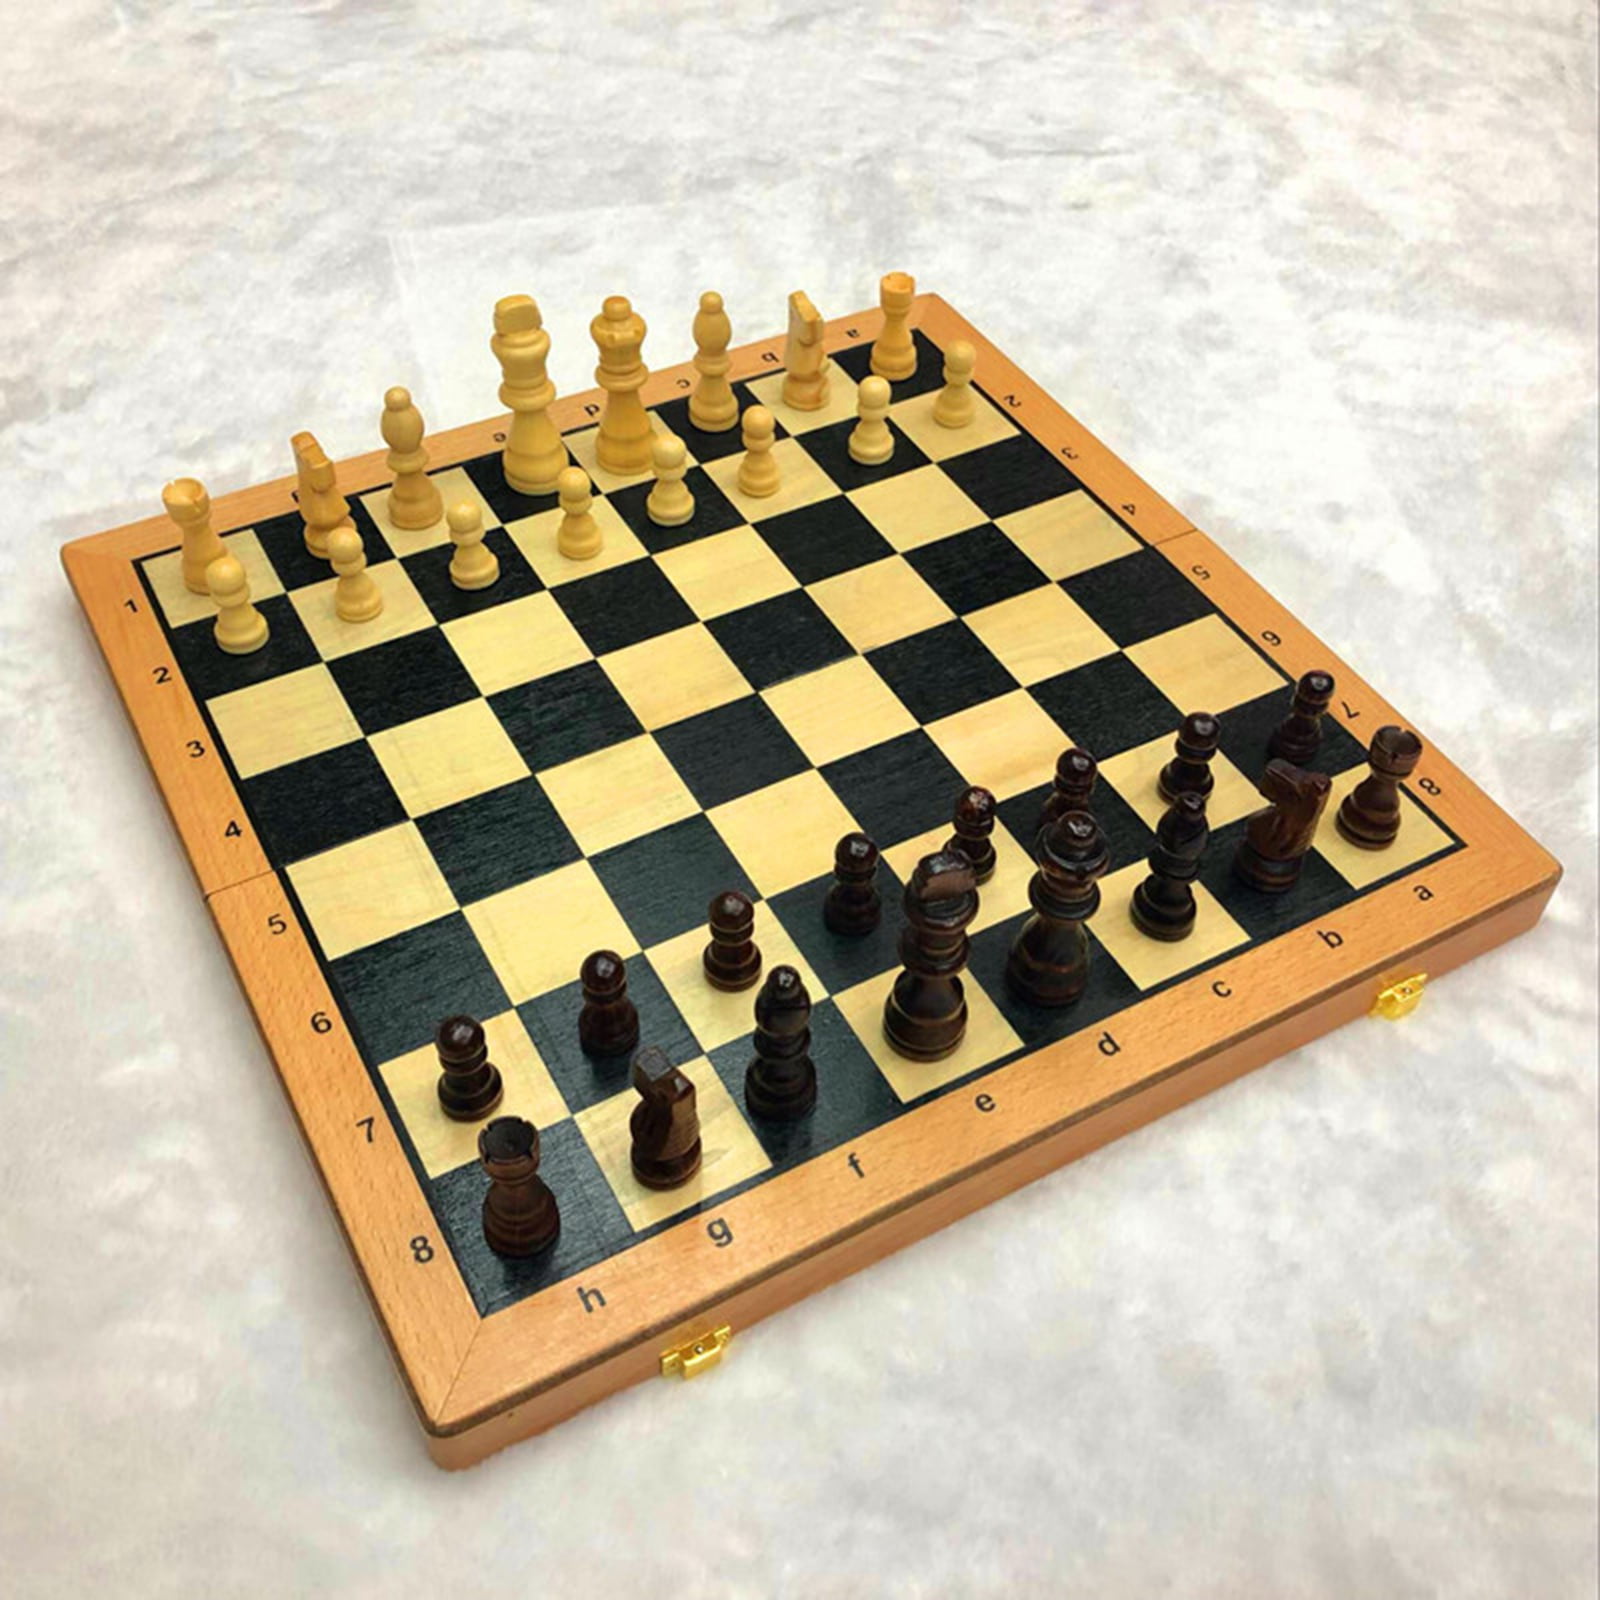 10X10 Square Box All Wood Pcs Ajedrez Chess Game Set Handcrafted In Mexico New 